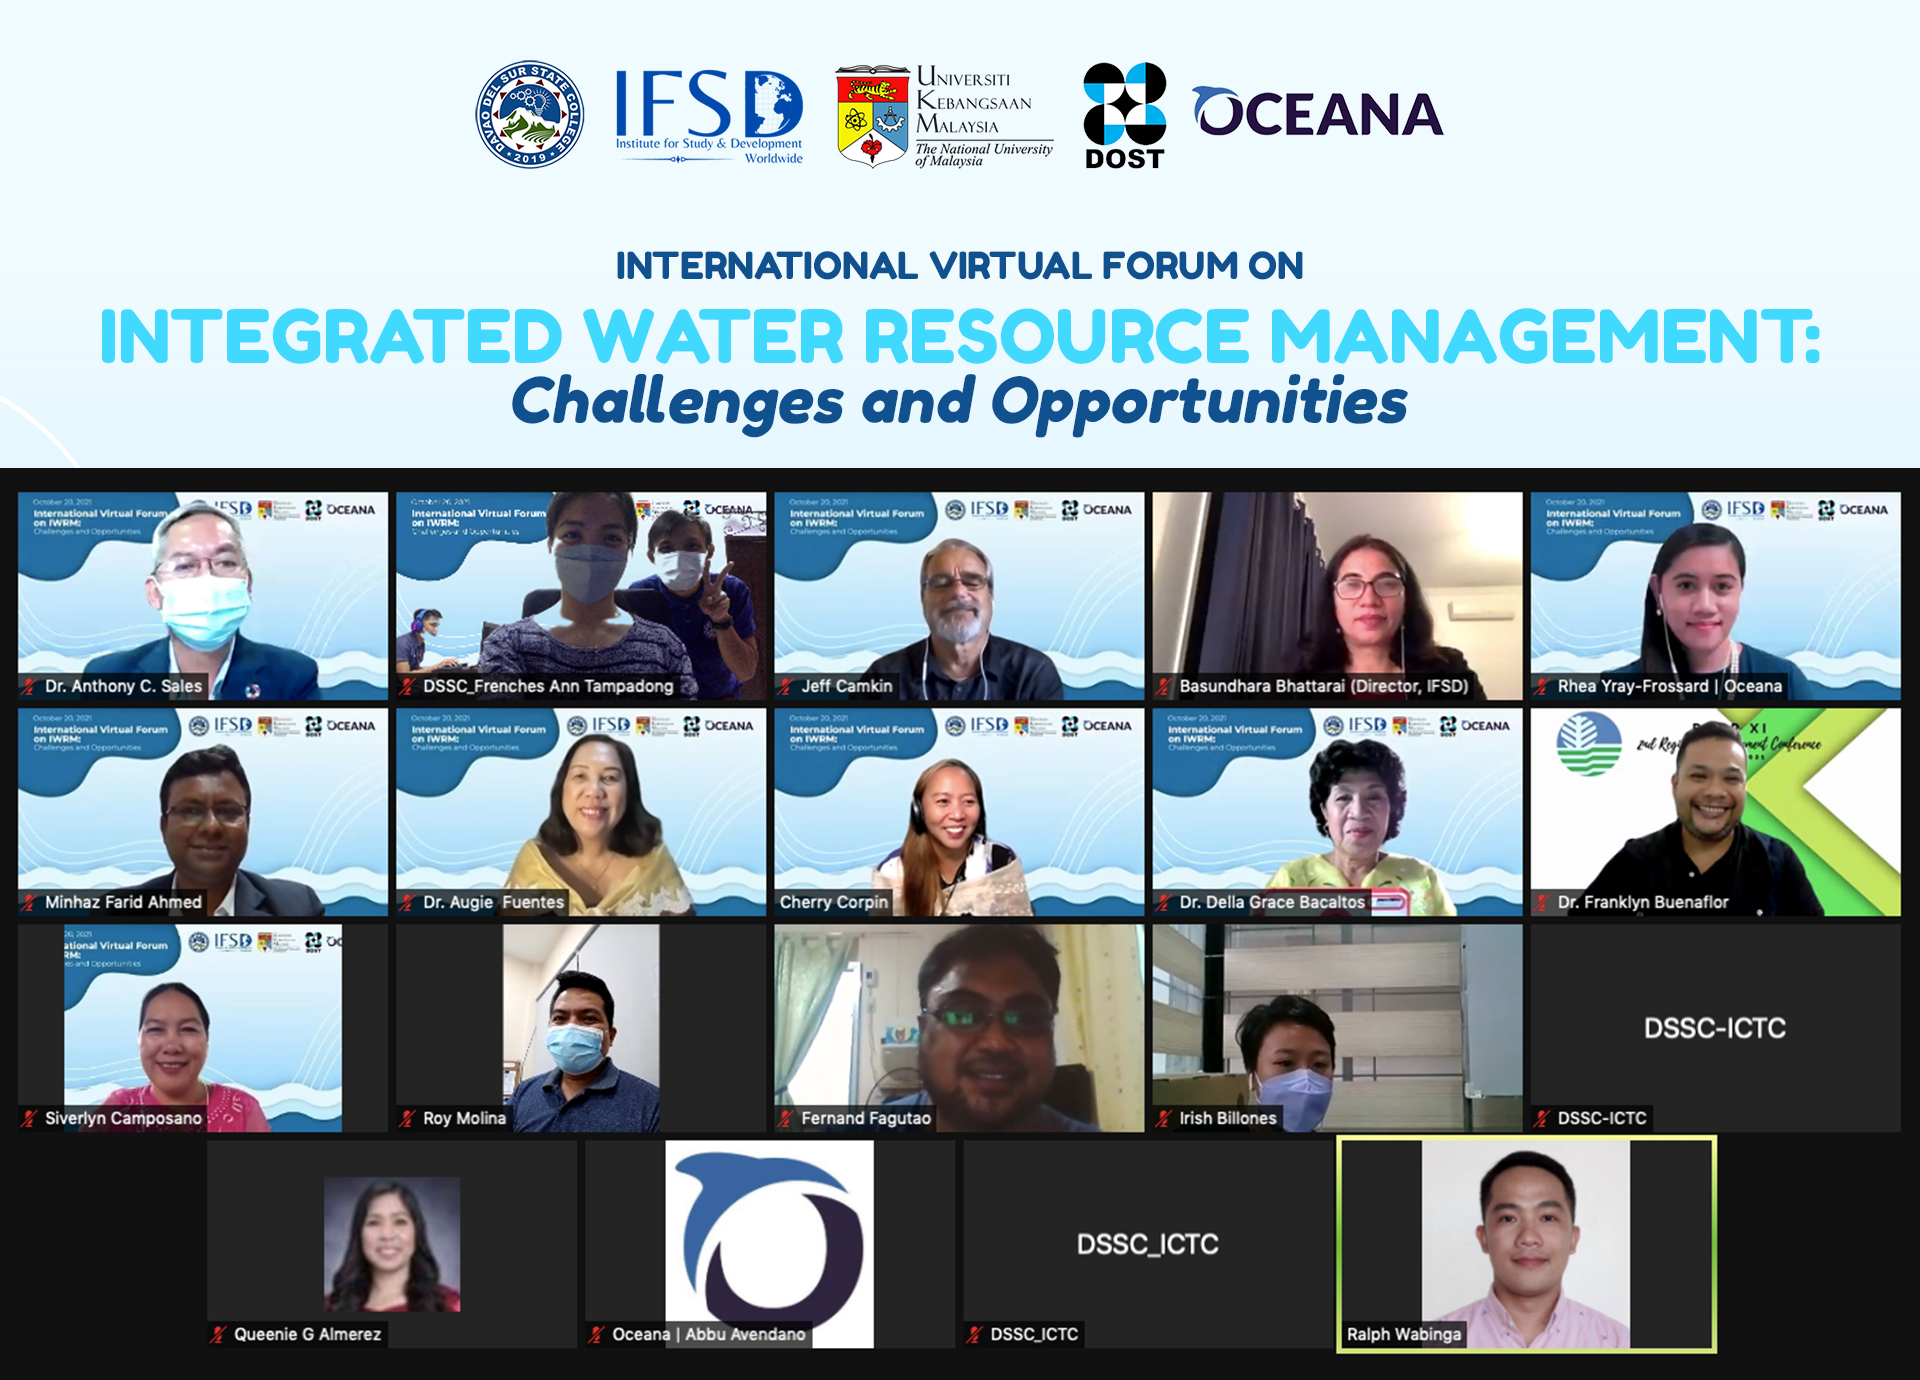 Davao del Sur State College (DSSC), through its International Affairs and Relations Office (IARO), hosted the International Virtual Forum on Integrated Water Resource Management (IWRM): Challenges and Opportunities on October 20, 2021 via Zoom and Facebook Live.